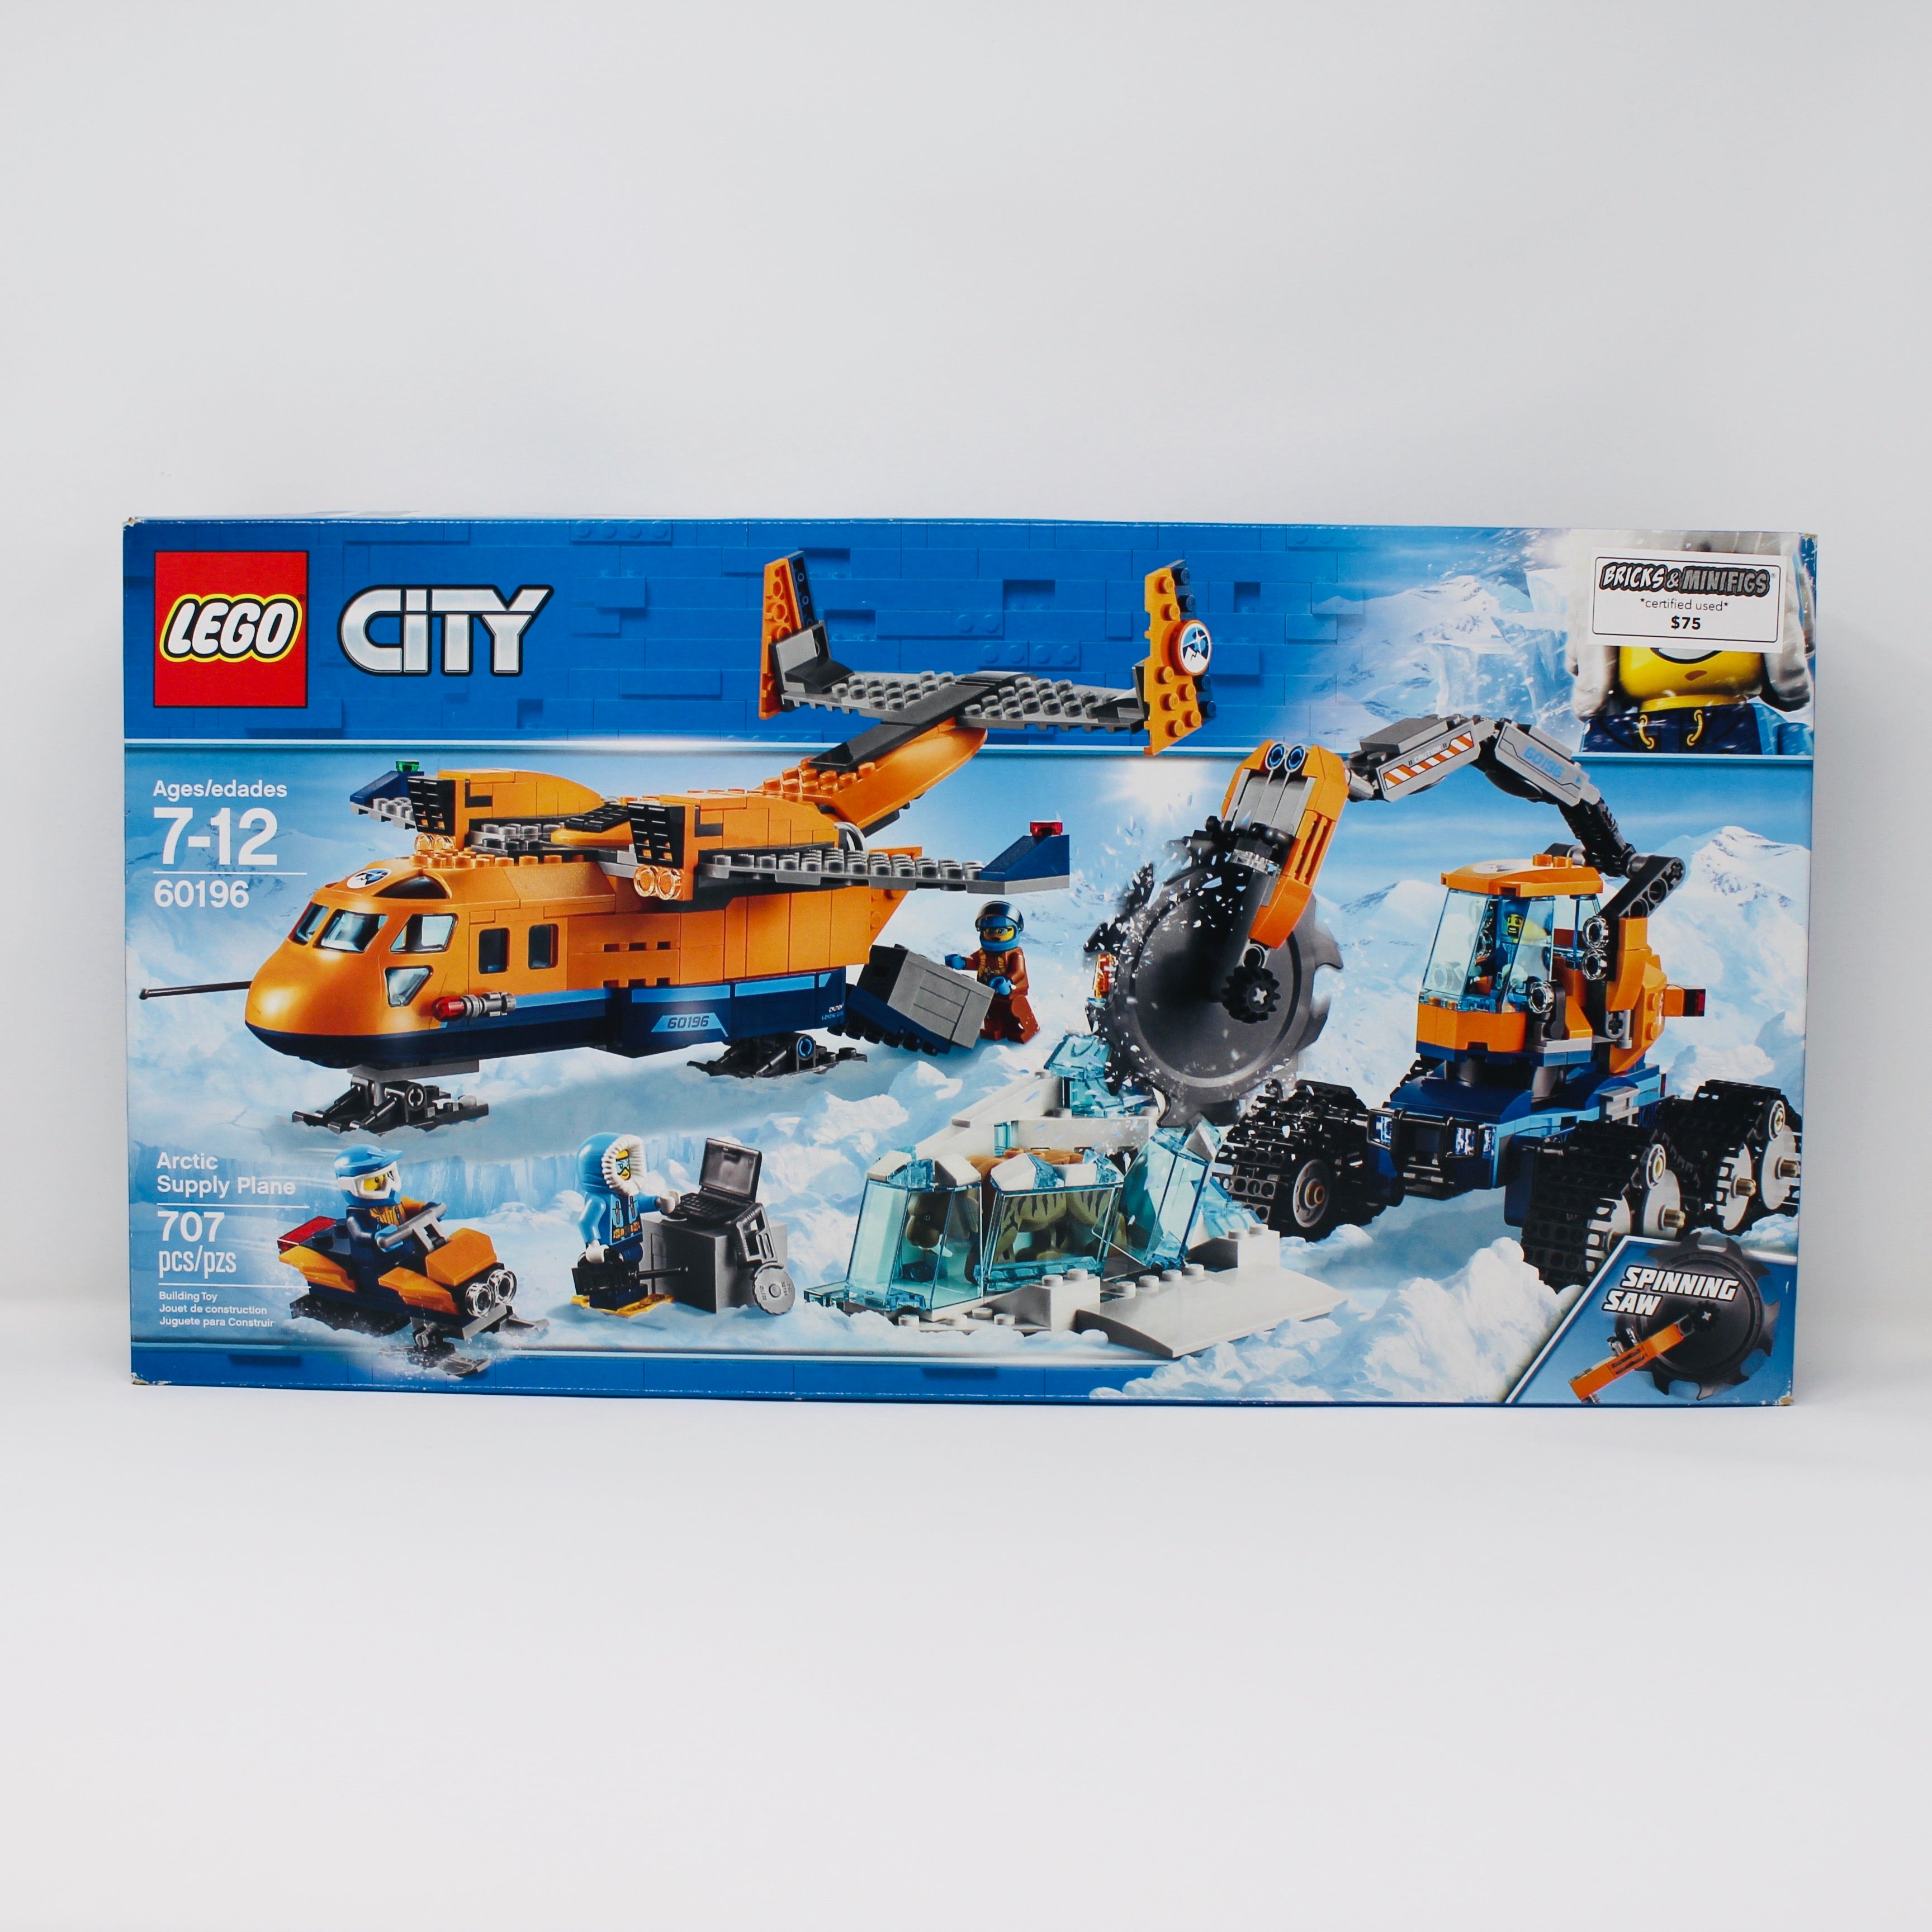 Certified Used Set 60196 City Arctic Supply Plane (2018)